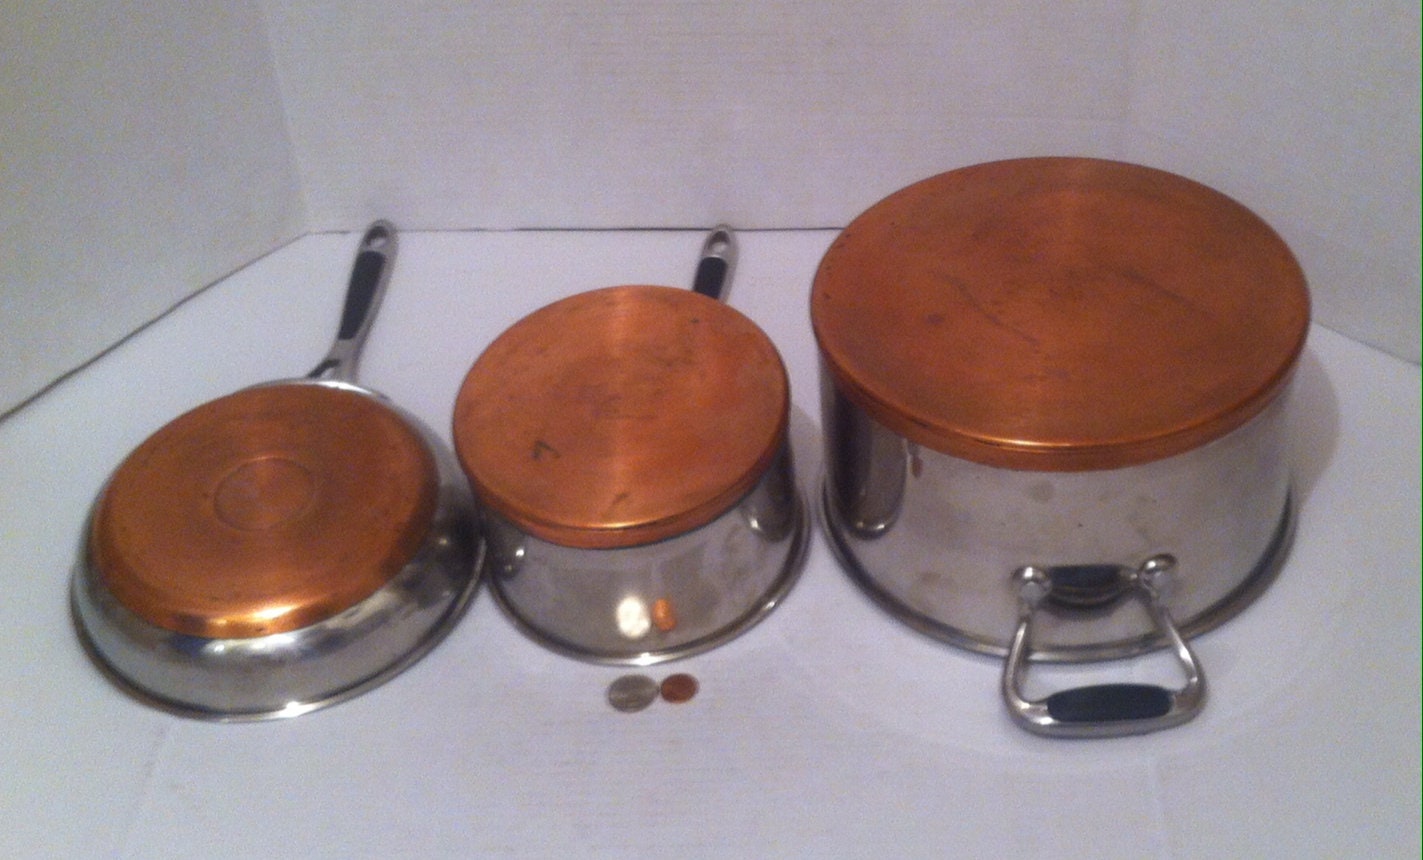 Vintage Set of 3 Copper and Stainless Steel Cooking Pots, Pan, RK, Real  Kitchen, Heavy Duty Quality, Copper Kitchen Decor, Hanging e 